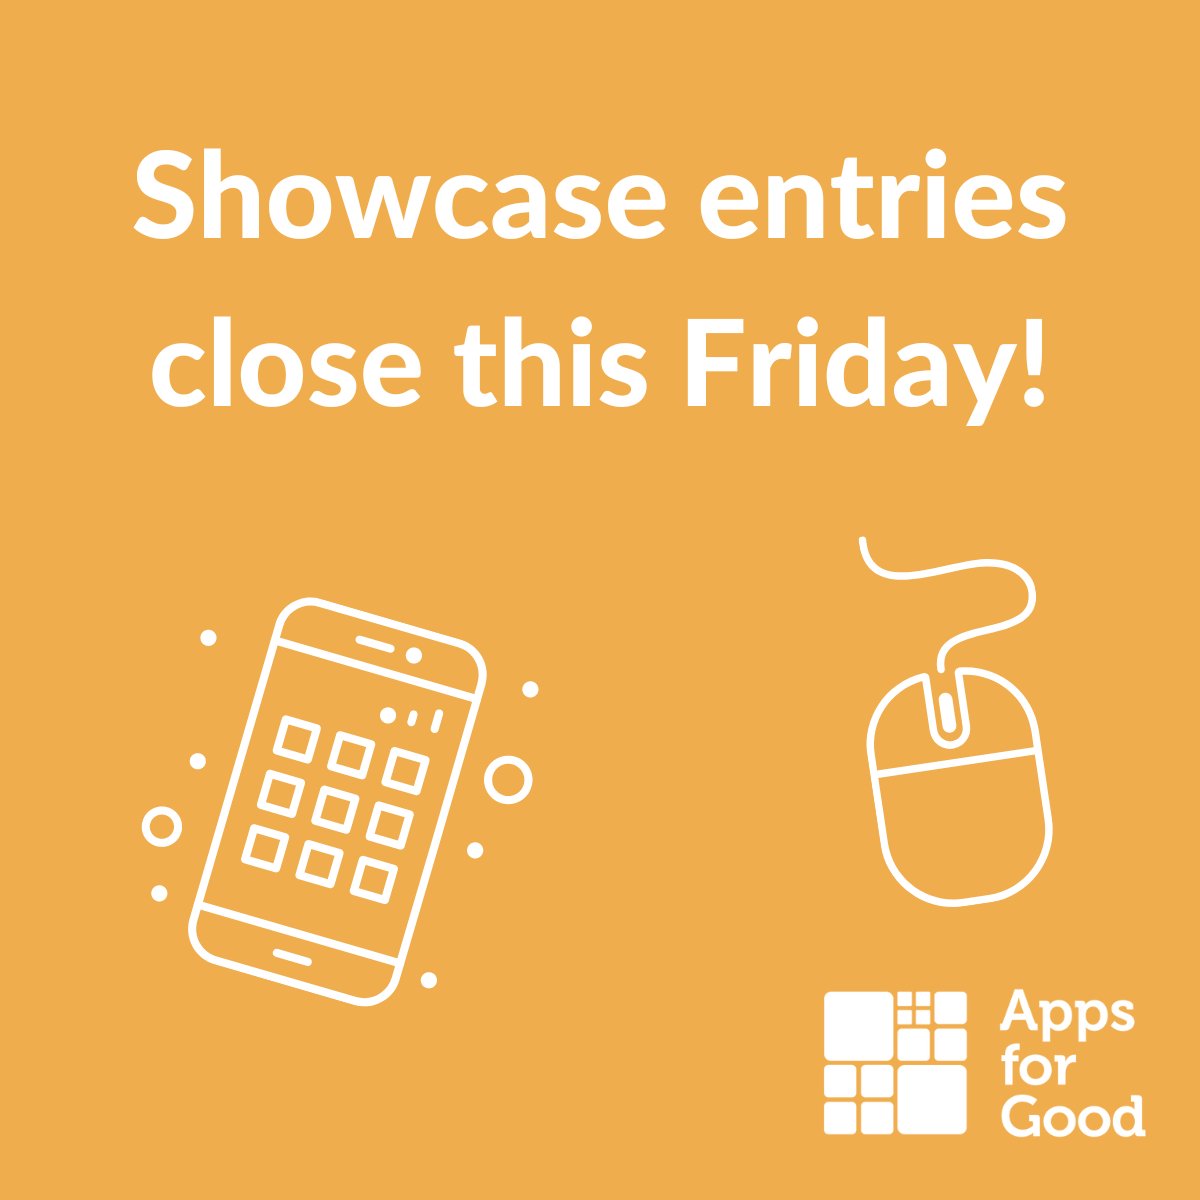 If you haven't entered our 2024 Showcase yet there's still time, but be quick - entries close this Friday 26th April! Get in touch if you have any final questions, or enter here: appsforgood.info/49gDpXl #AfGShowcase